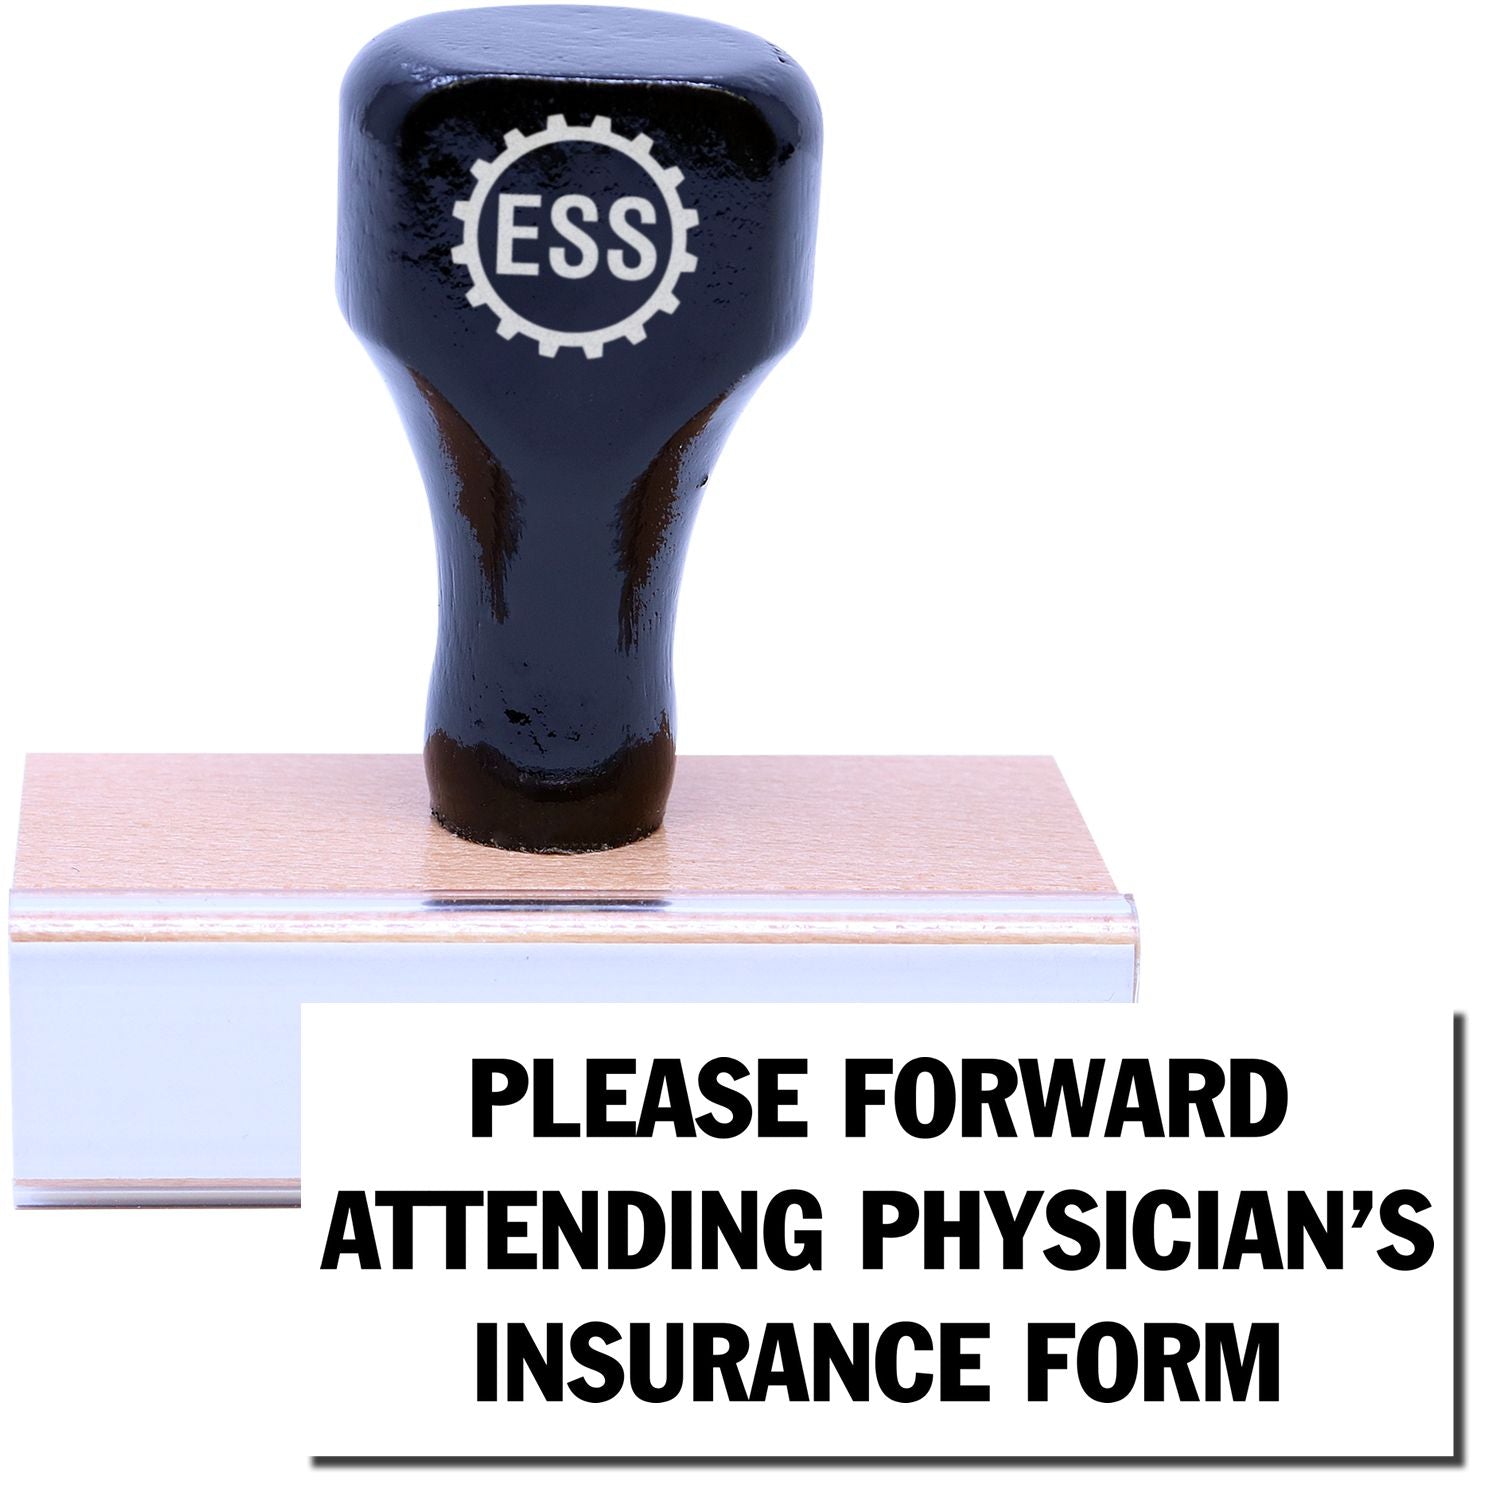 A stock office rubber stamp with a stamped image showing how the text "PLEASE FORWARD ATTENDING PHYSICIAN'S INSURANCE FORM" in a large font is displayed after stamping.